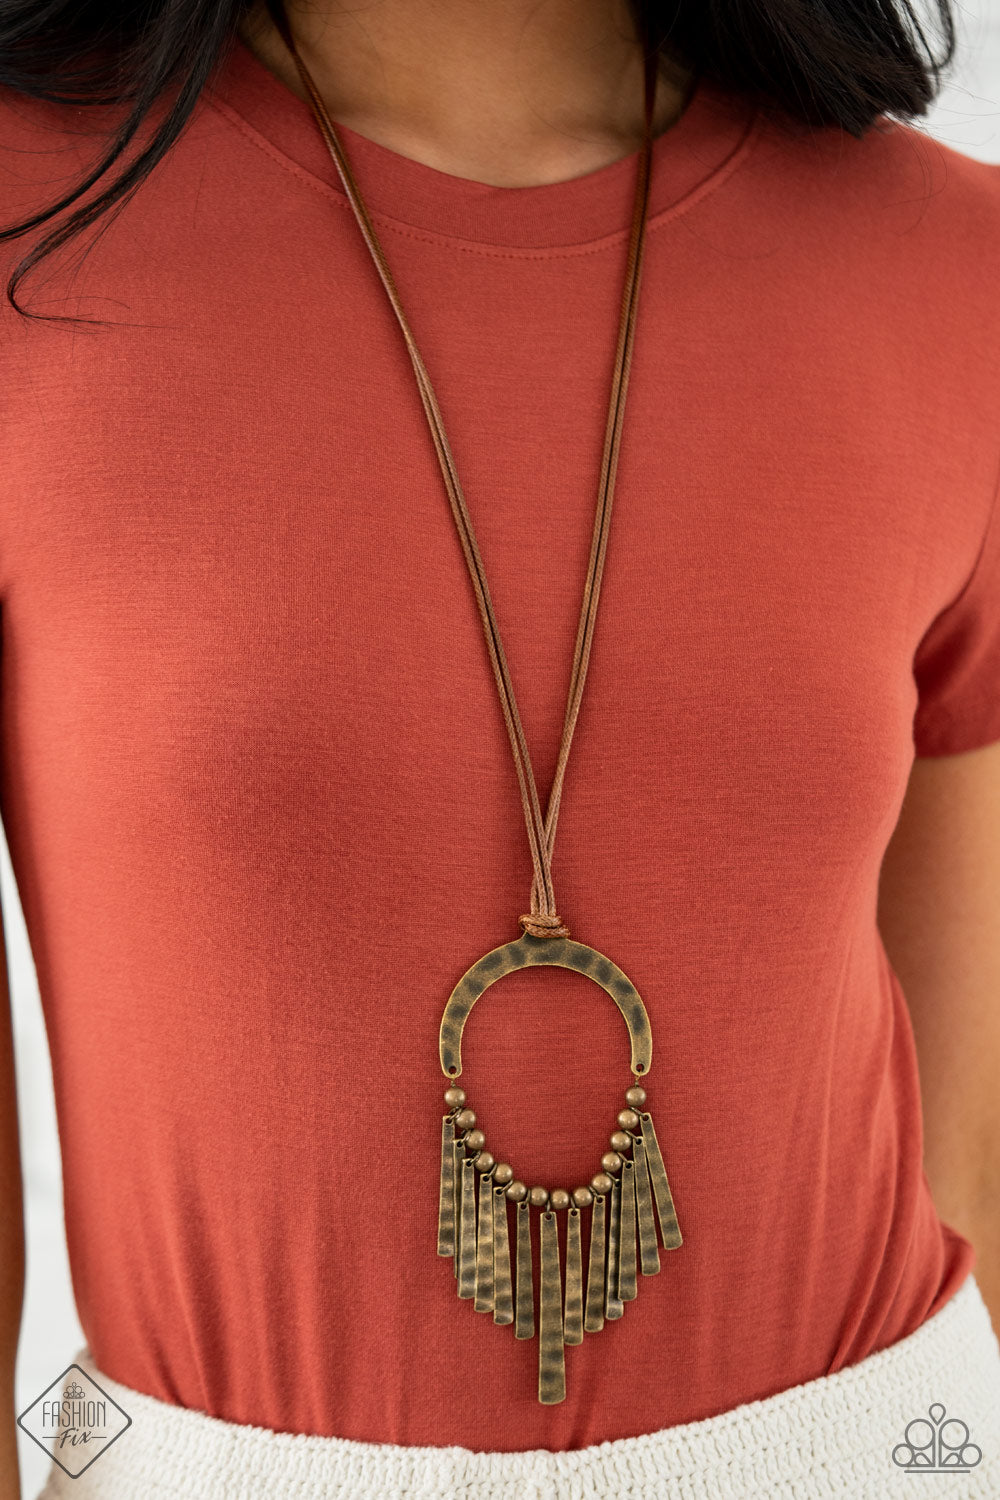 Paparazzi You Wouldnt FLARE! Brass Fashion Fix Necklace $5 Jewelry #P2ST-BRXX-086AF